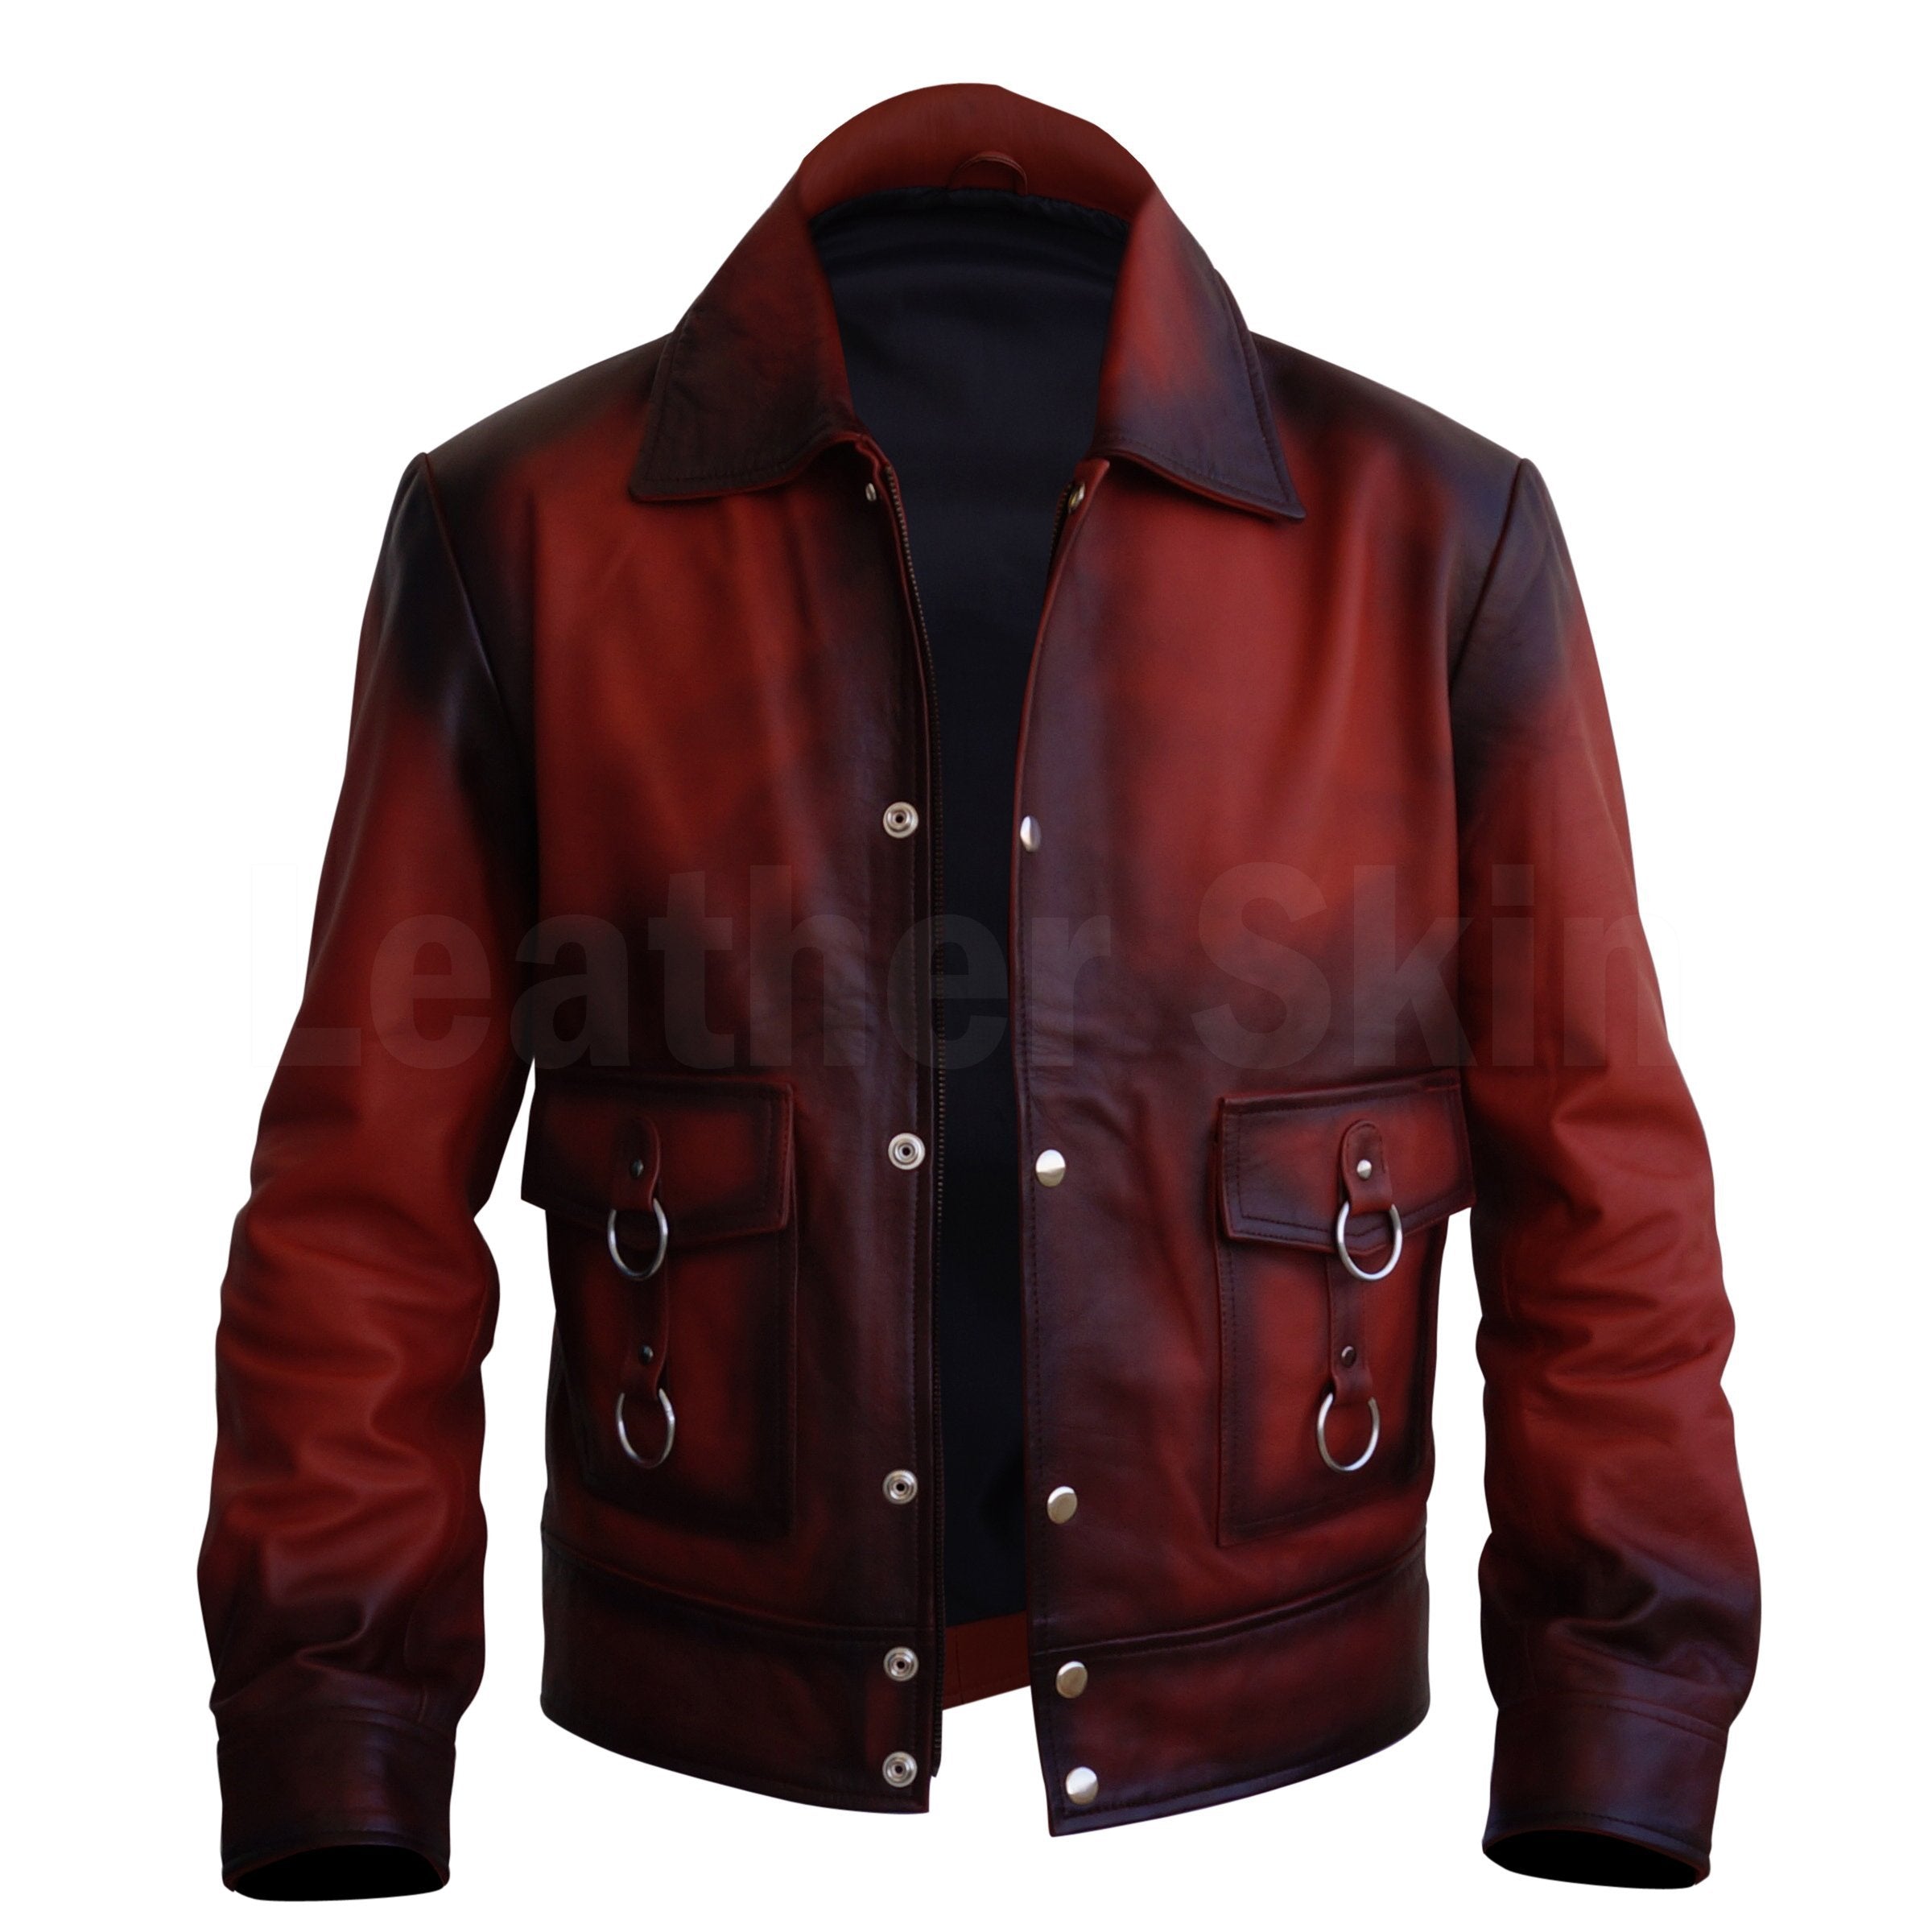 Men Distressed Tan Red Cow Leather Jacket with Metal Hoops Front Zipper ...